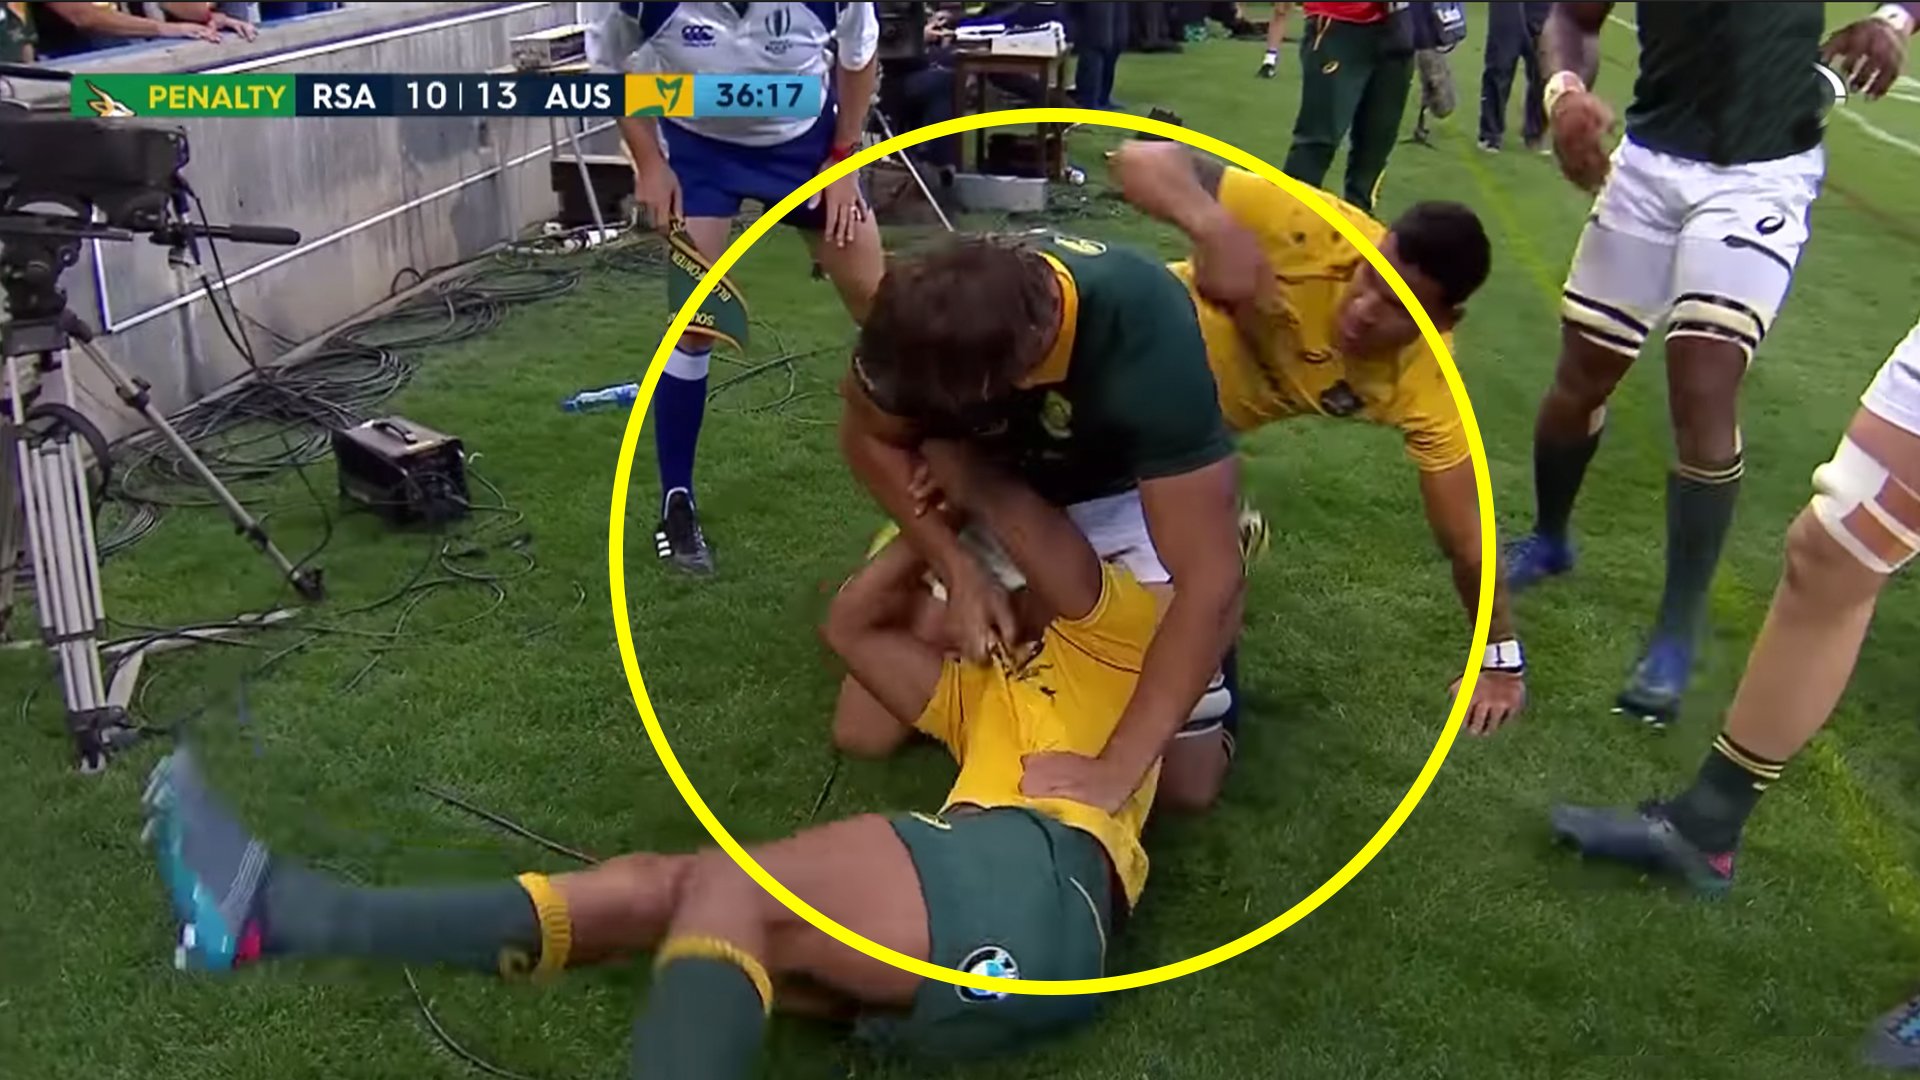 What happens when you pull someone's hair in a rugby match